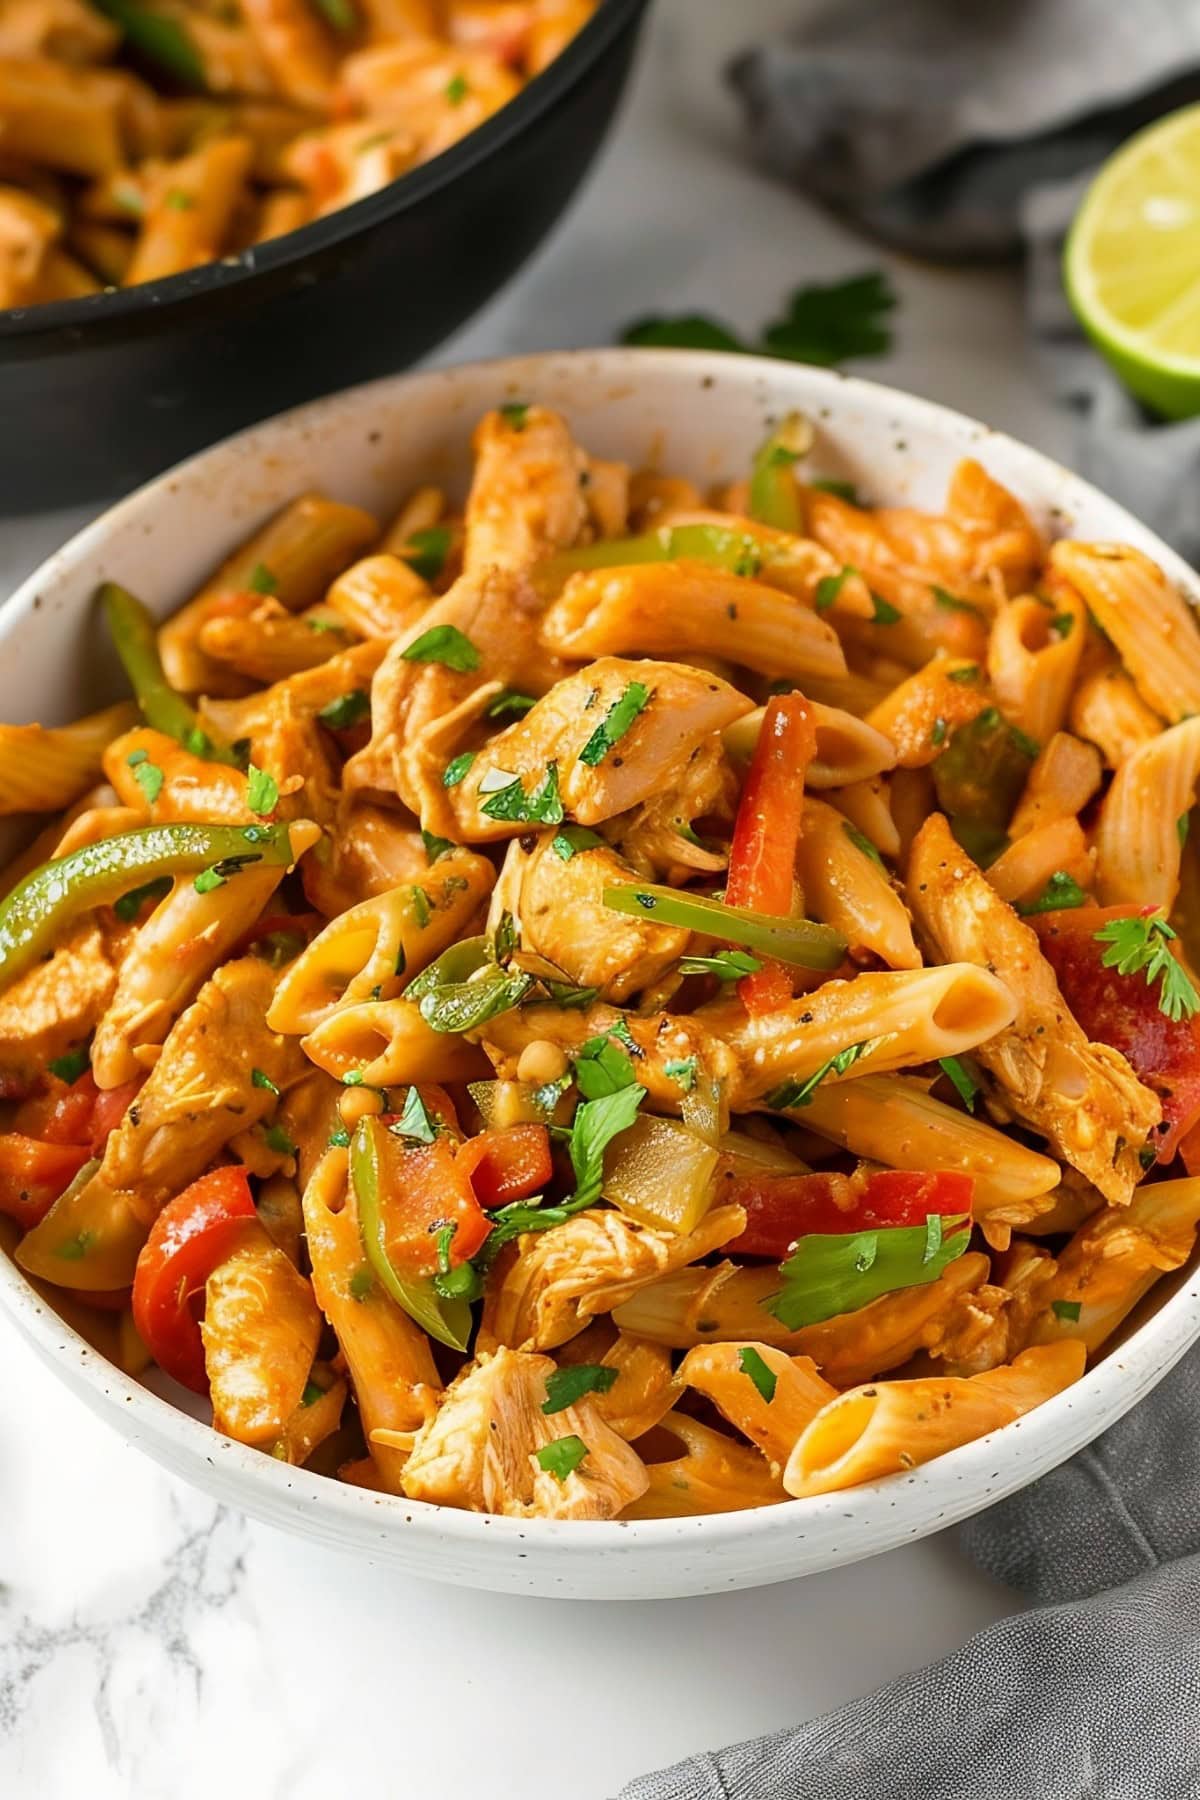 A bowl of smoky and spicy fajita-style chicken penne pasta with bell peppers and cilantro